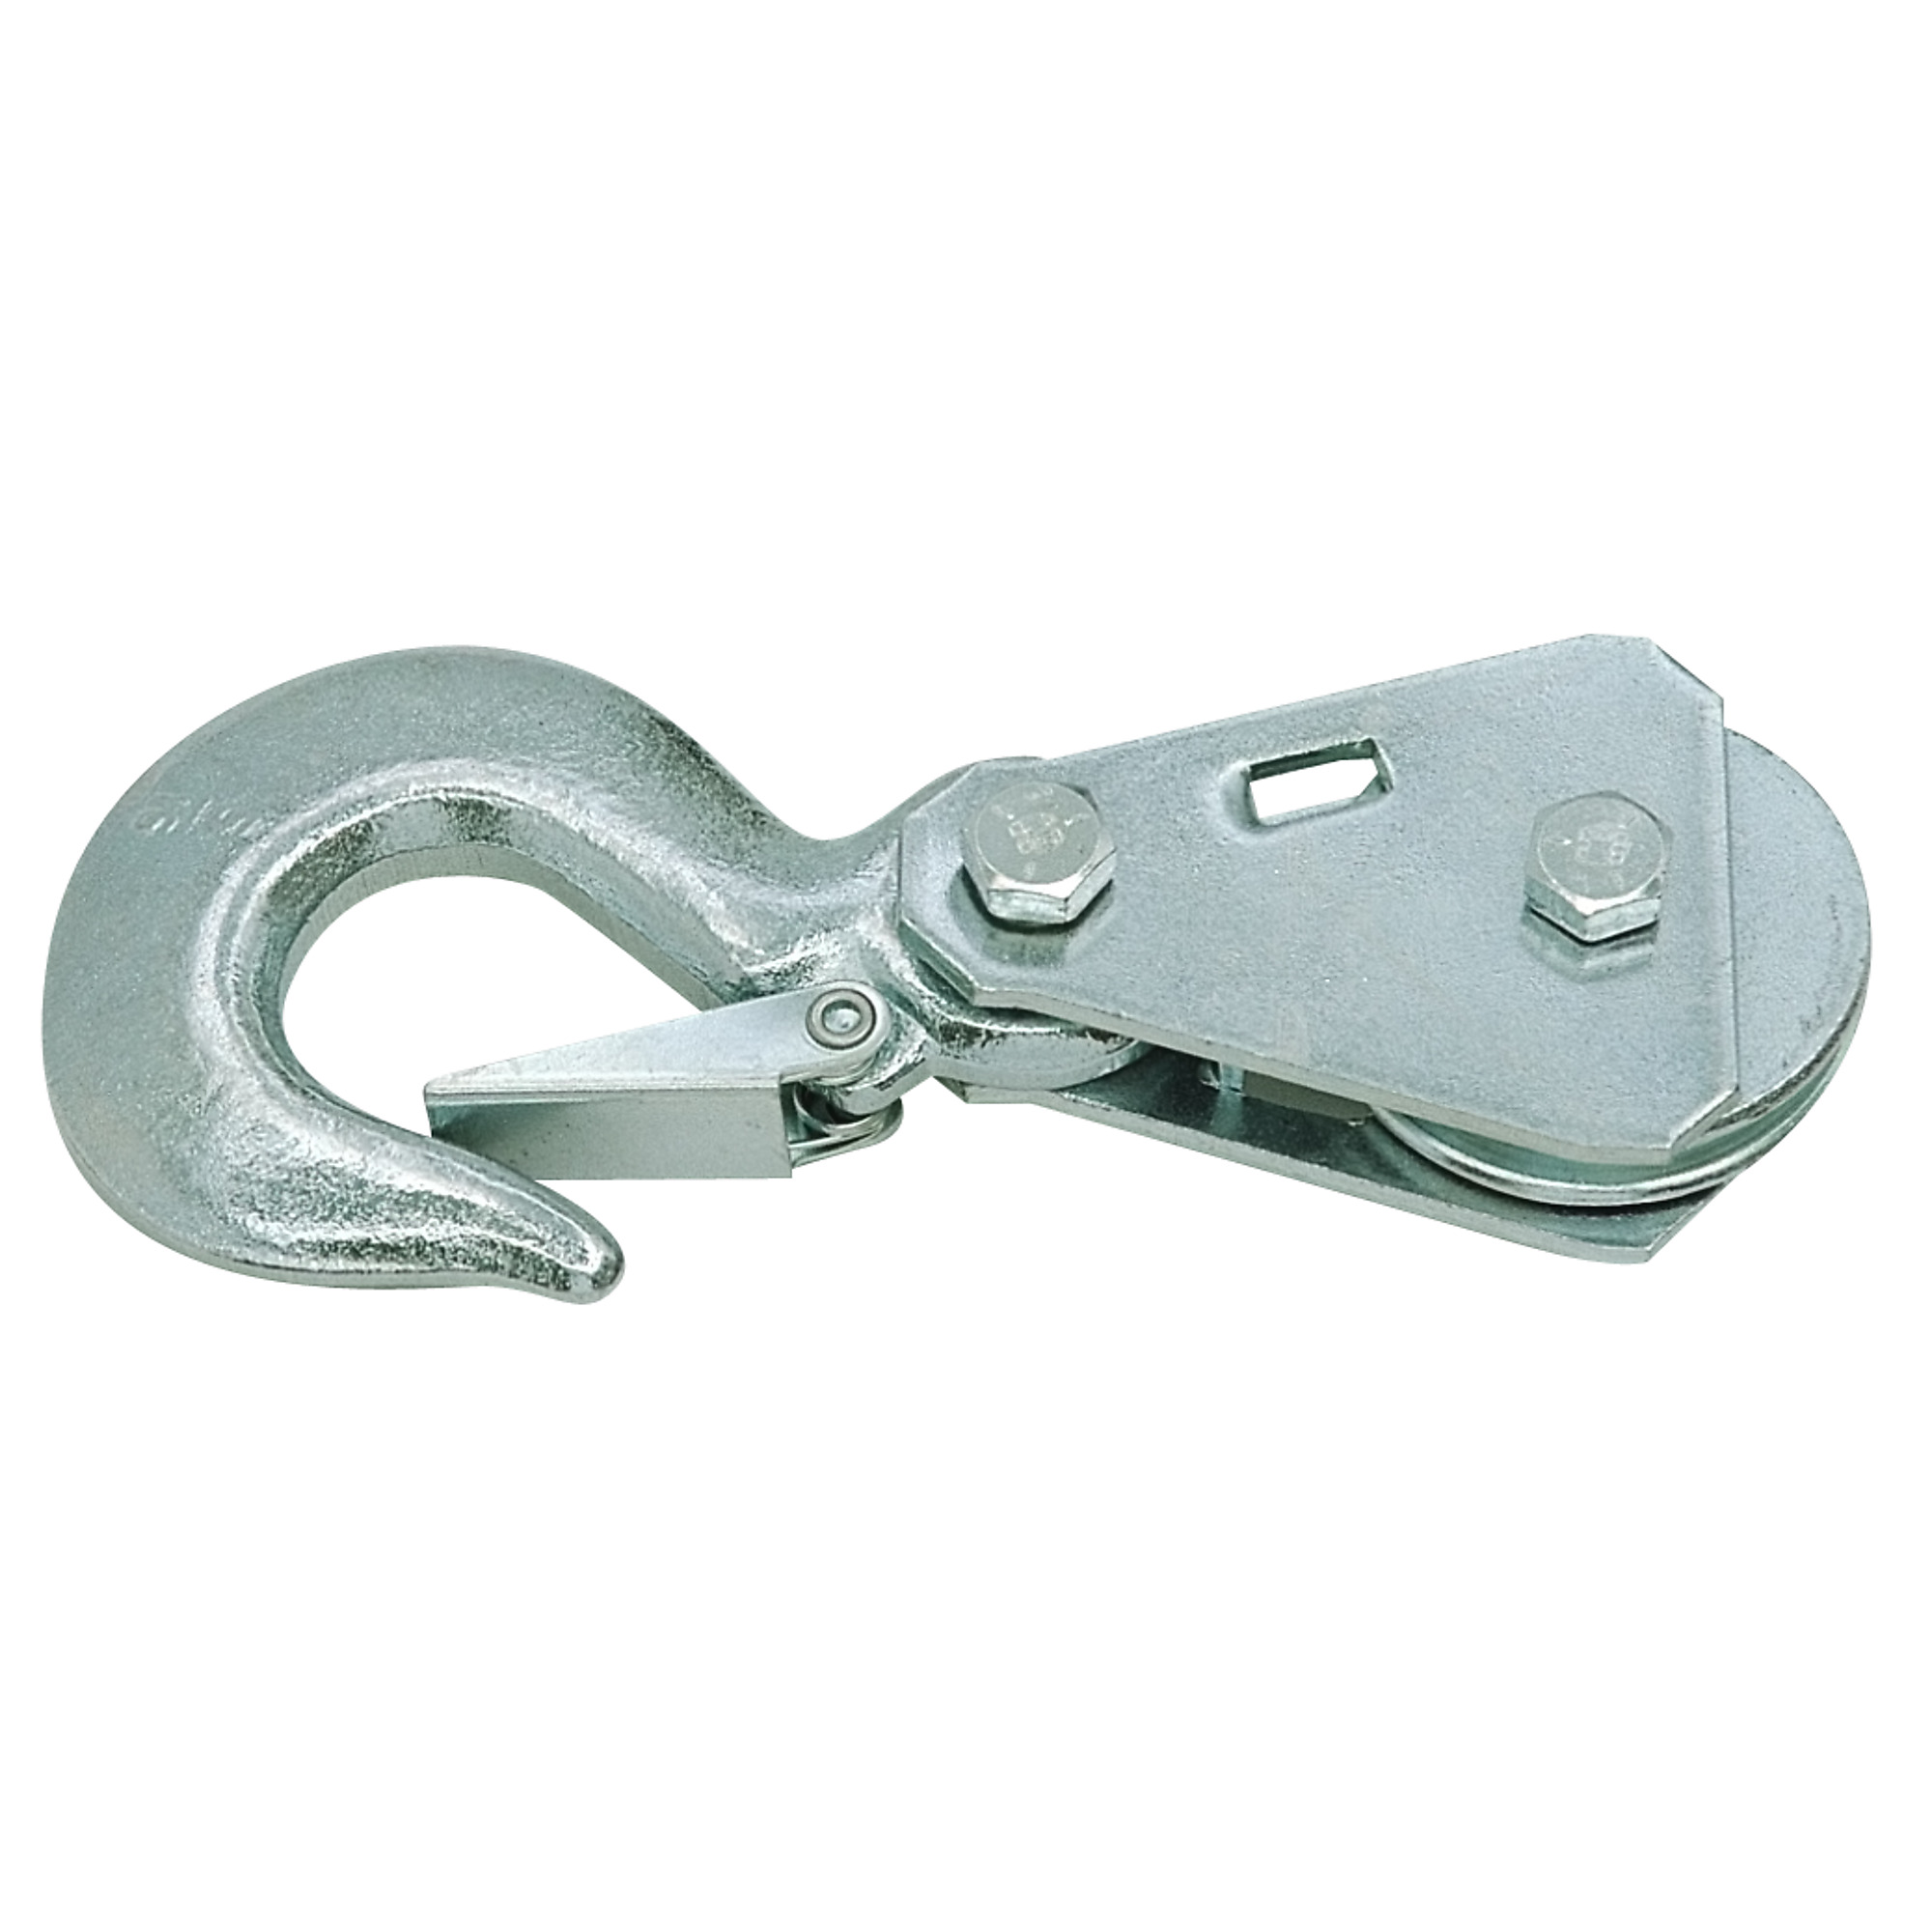 American Power Pull, Pulley Block with 5/16Inch Safety Hook, Capacity 4000 lb, Model AGP101